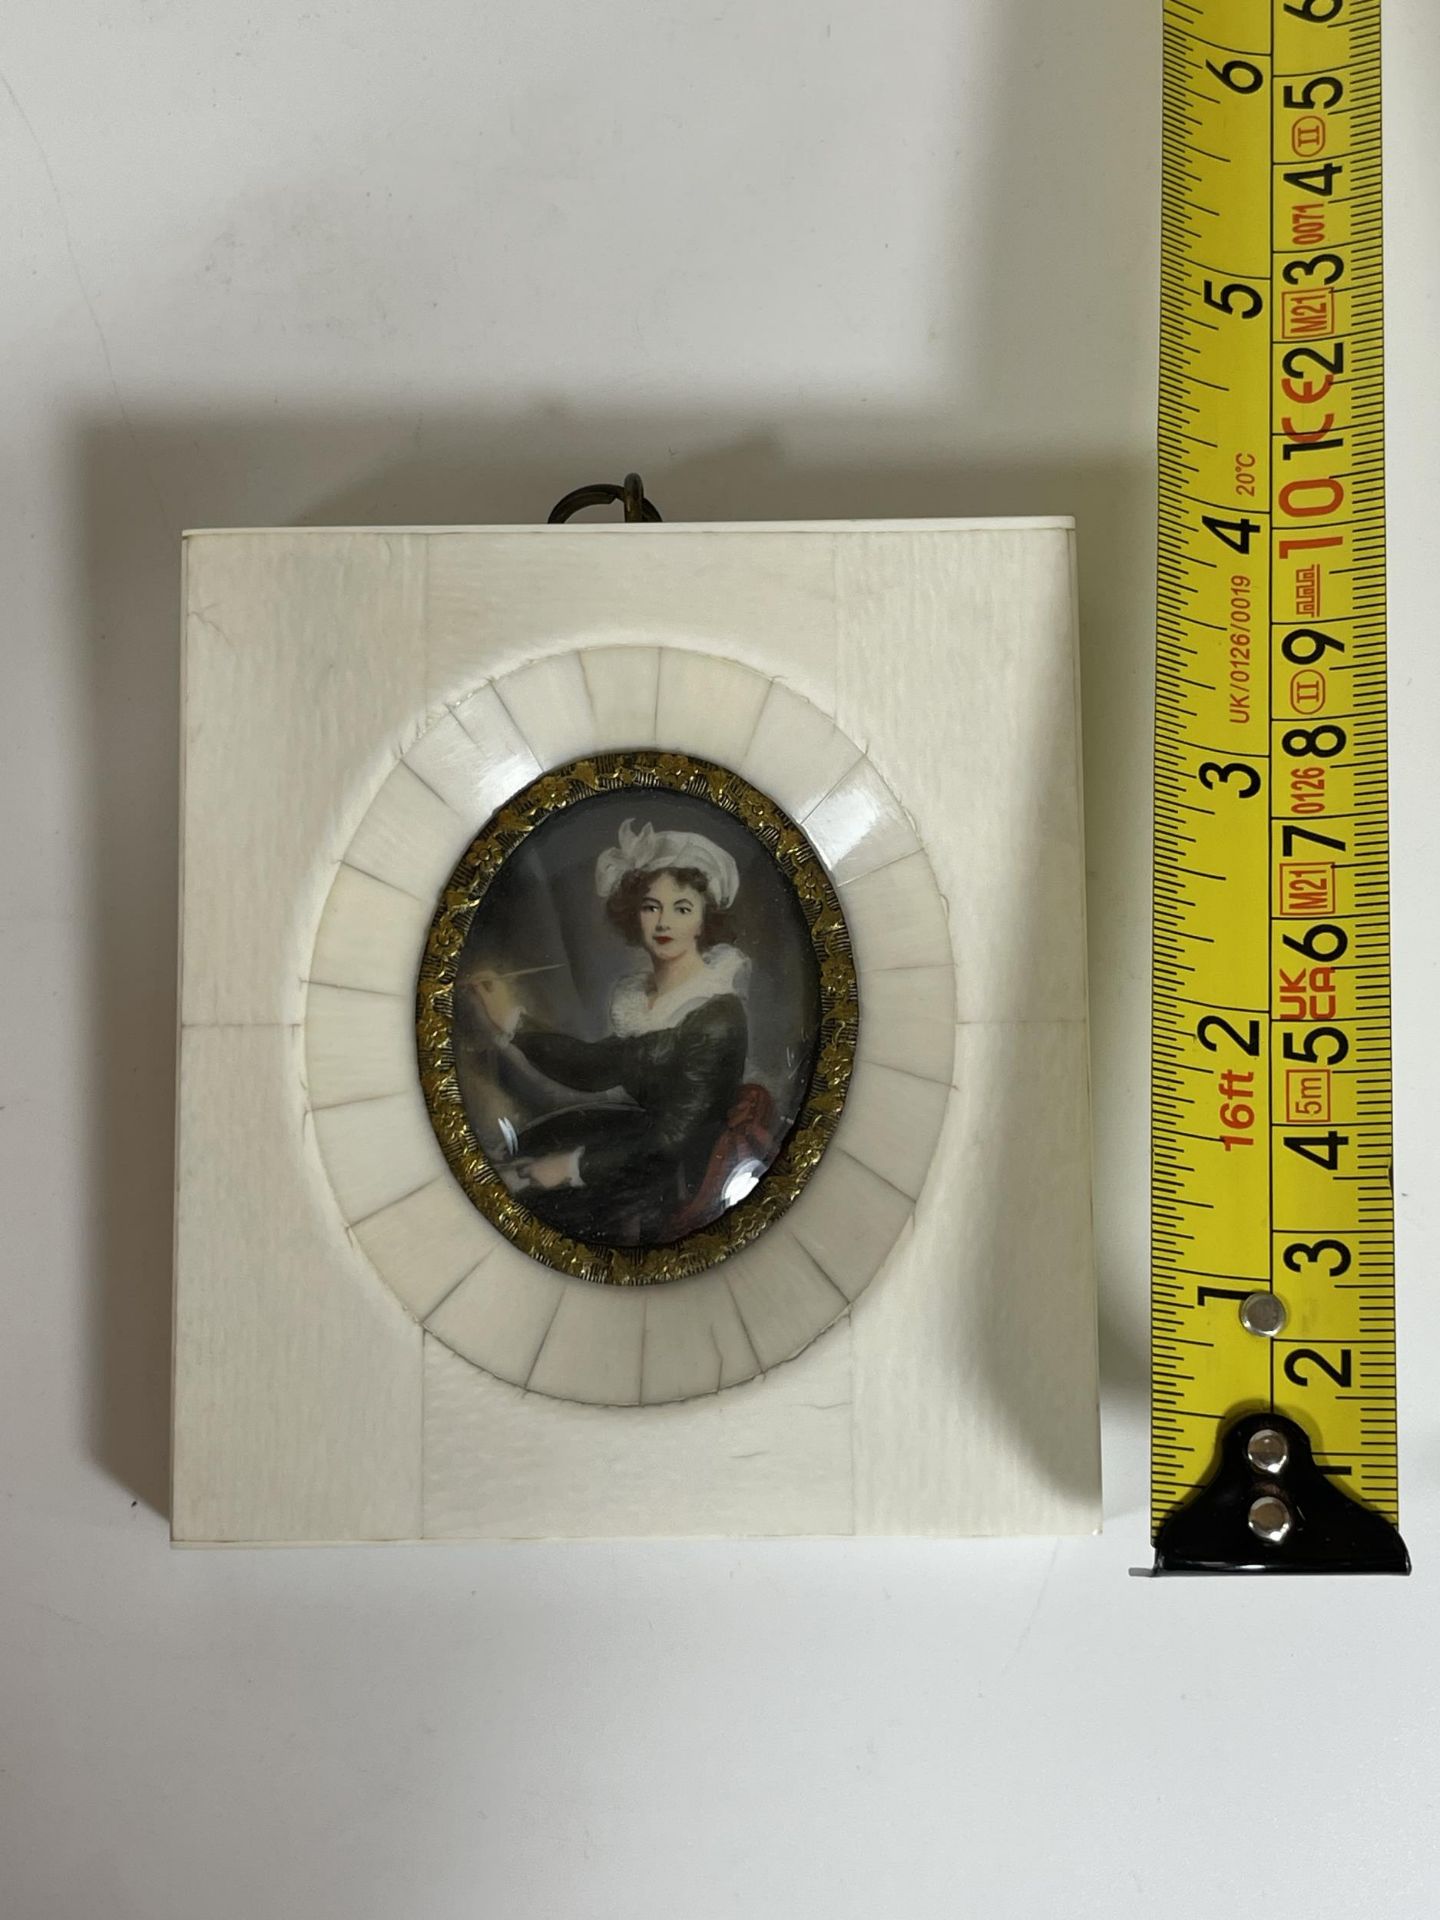 AN ANTIQUE PORTRAIT MINIATURE OF A LADY PAINTING WITH GILT BORDER - Image 6 of 6